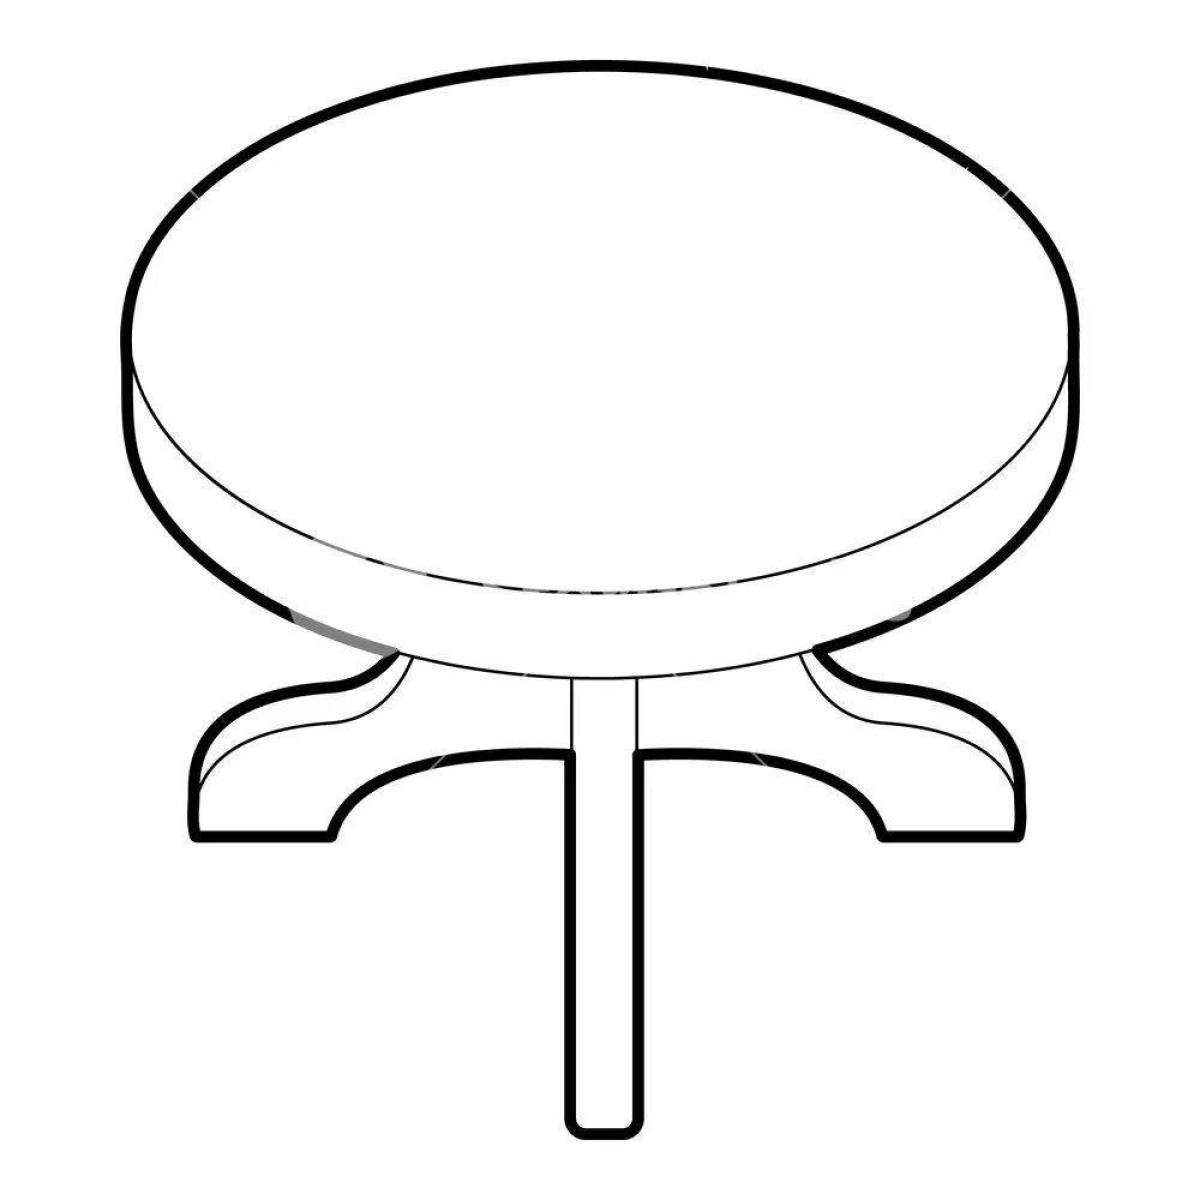 Coloring page graceful round table